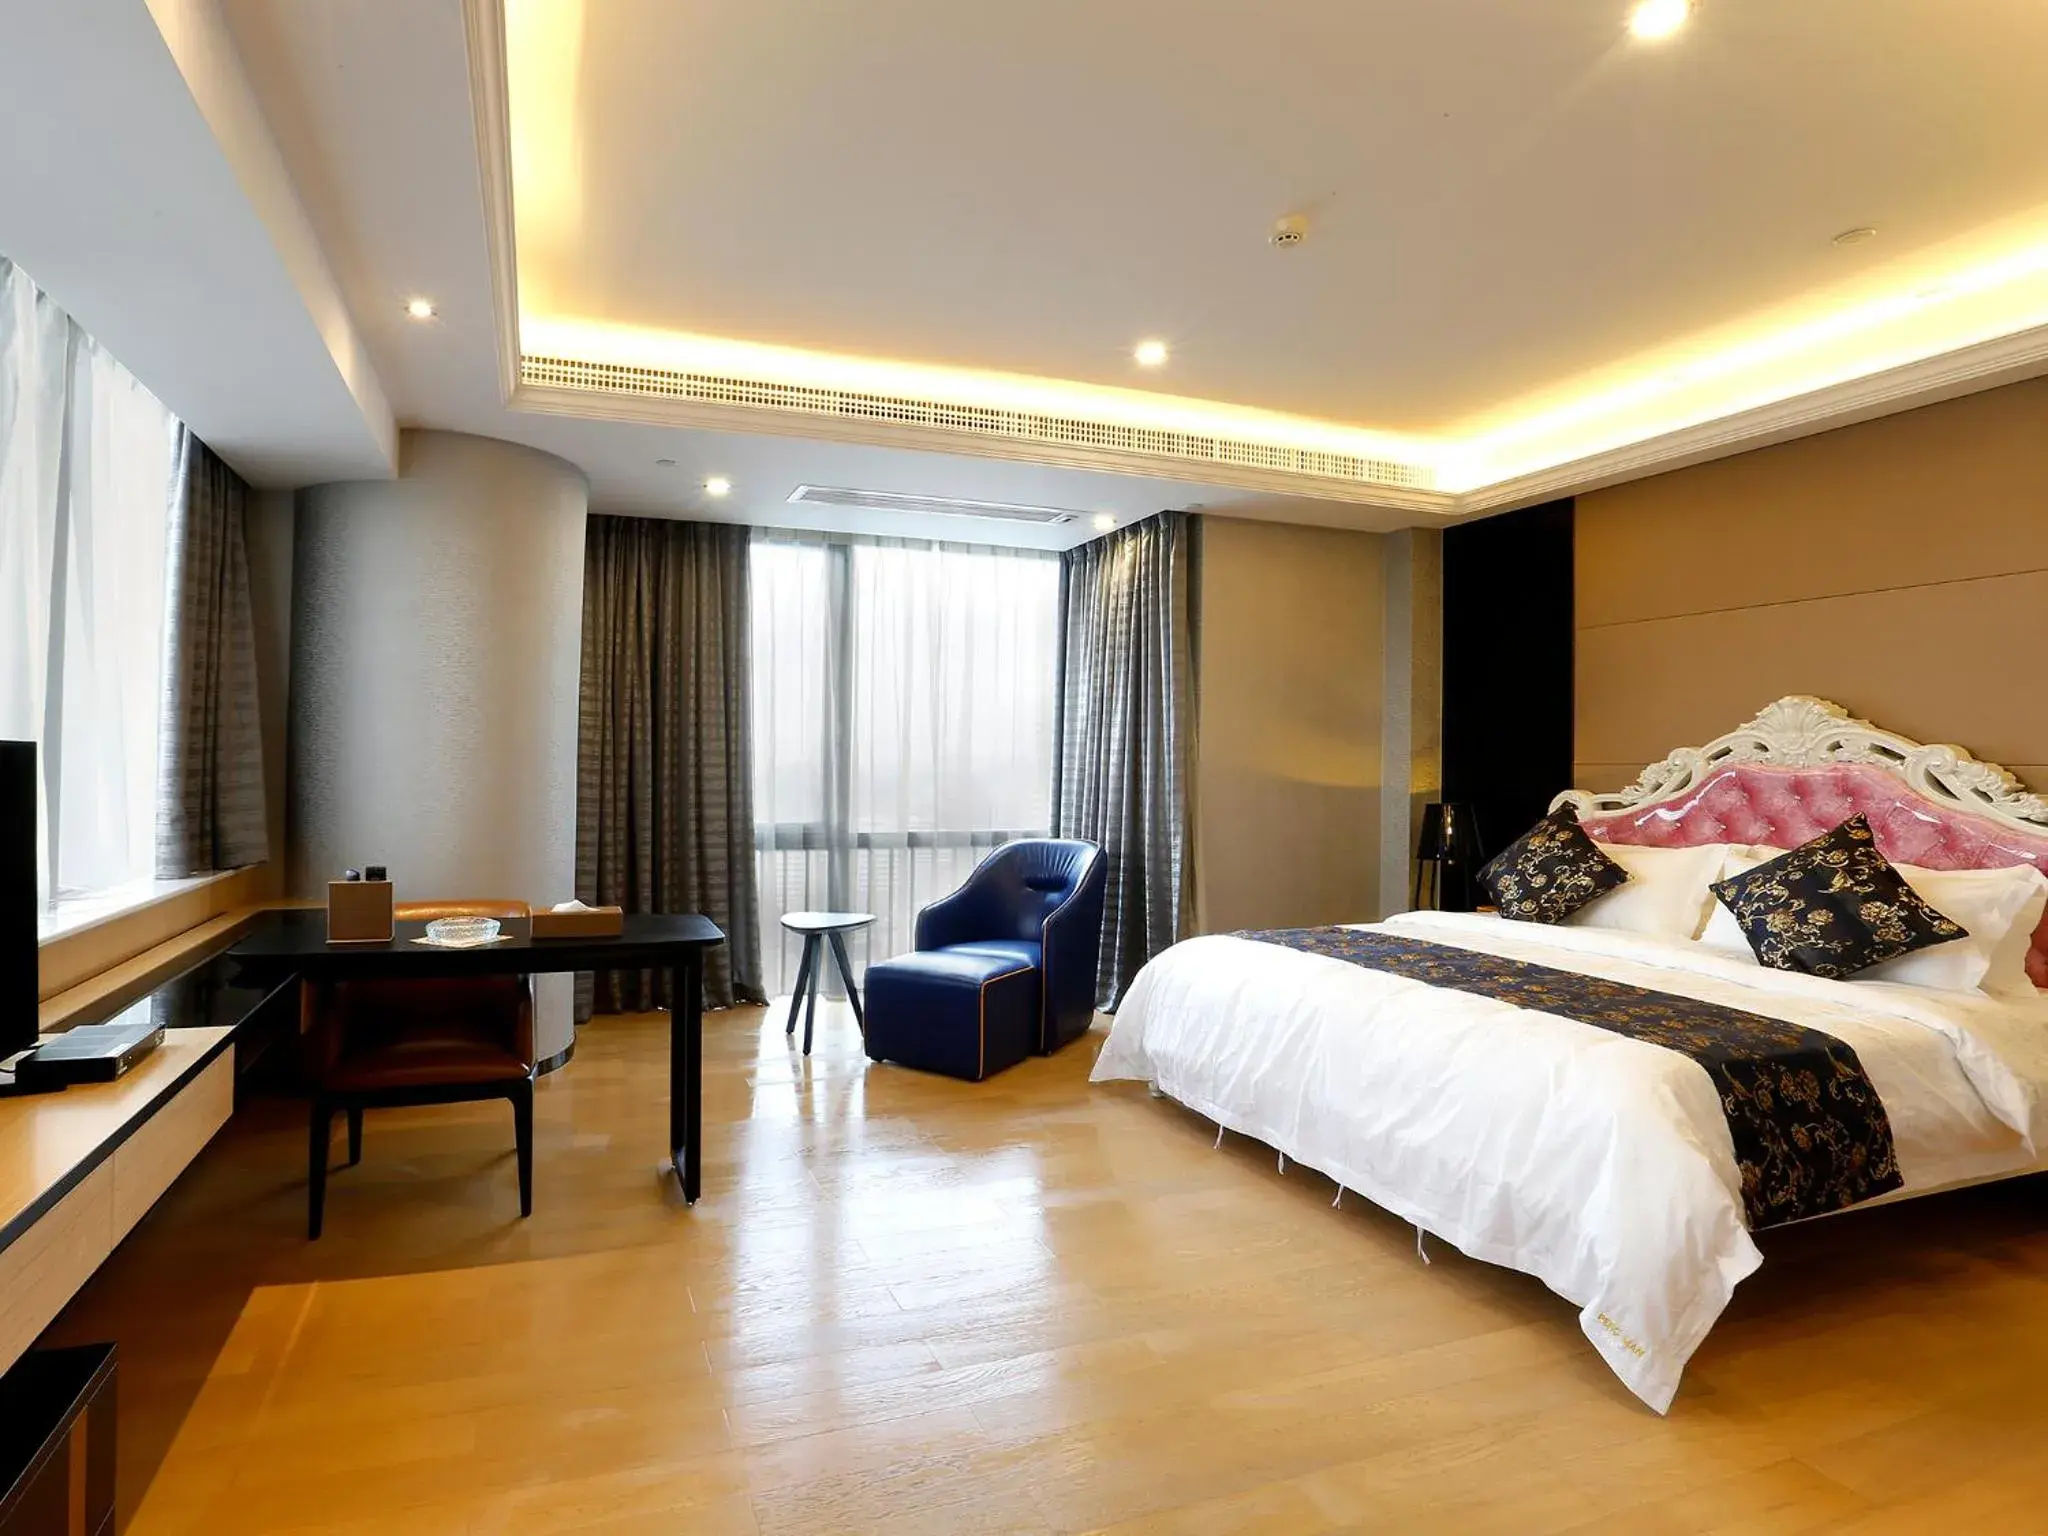 Off site in Pengman Beijing Rd. A-mall Apartment